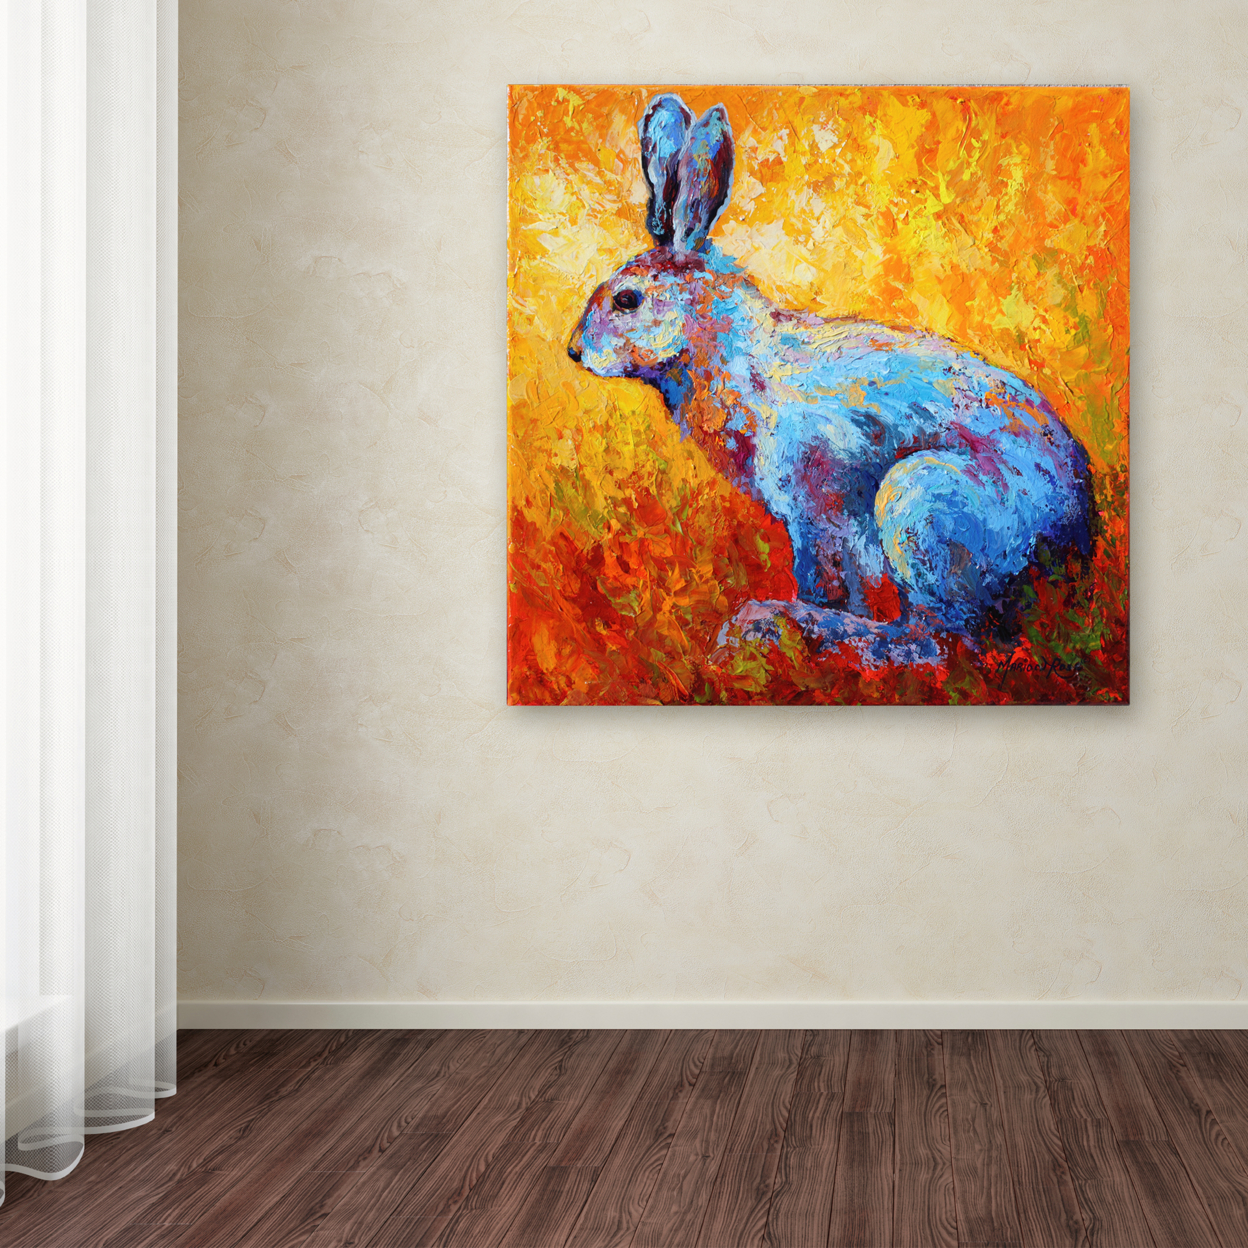 Marion Rose 'Bunnie (krabbit)' Ready To Hang Canvas Art 35 X 35 Inches Made In USA